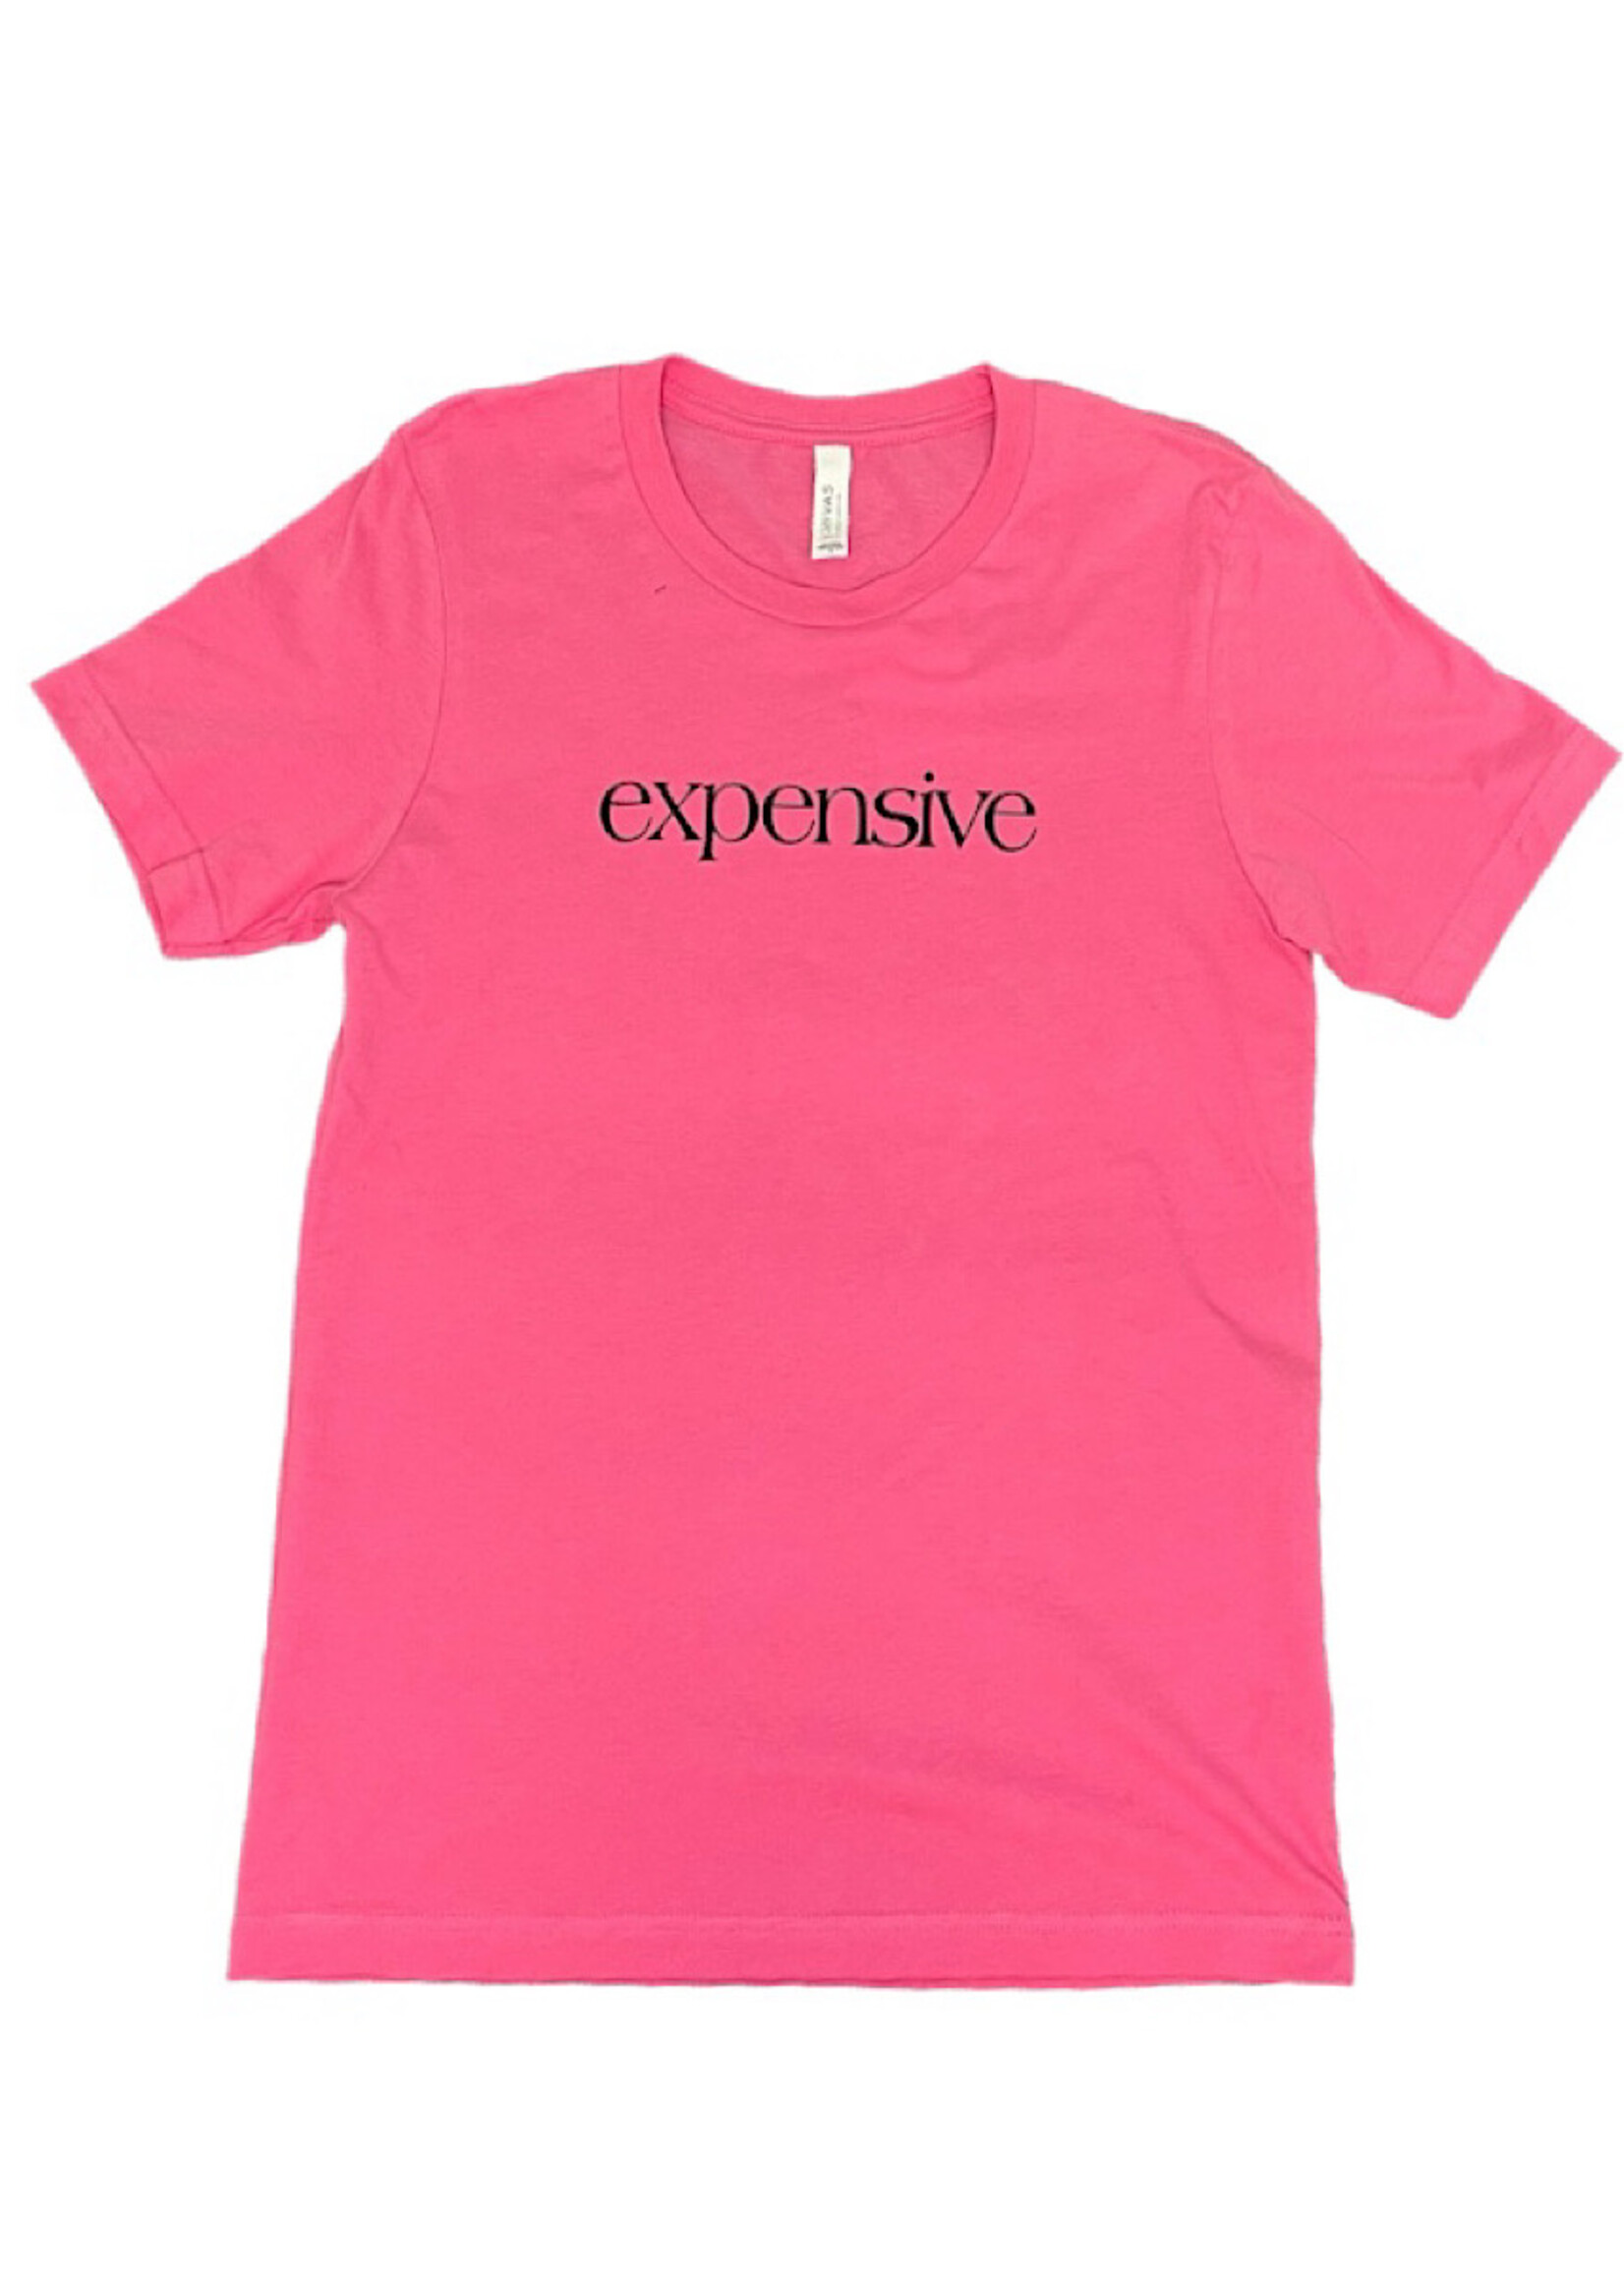 Hot Pink Expensive - Valentine's Day Tee